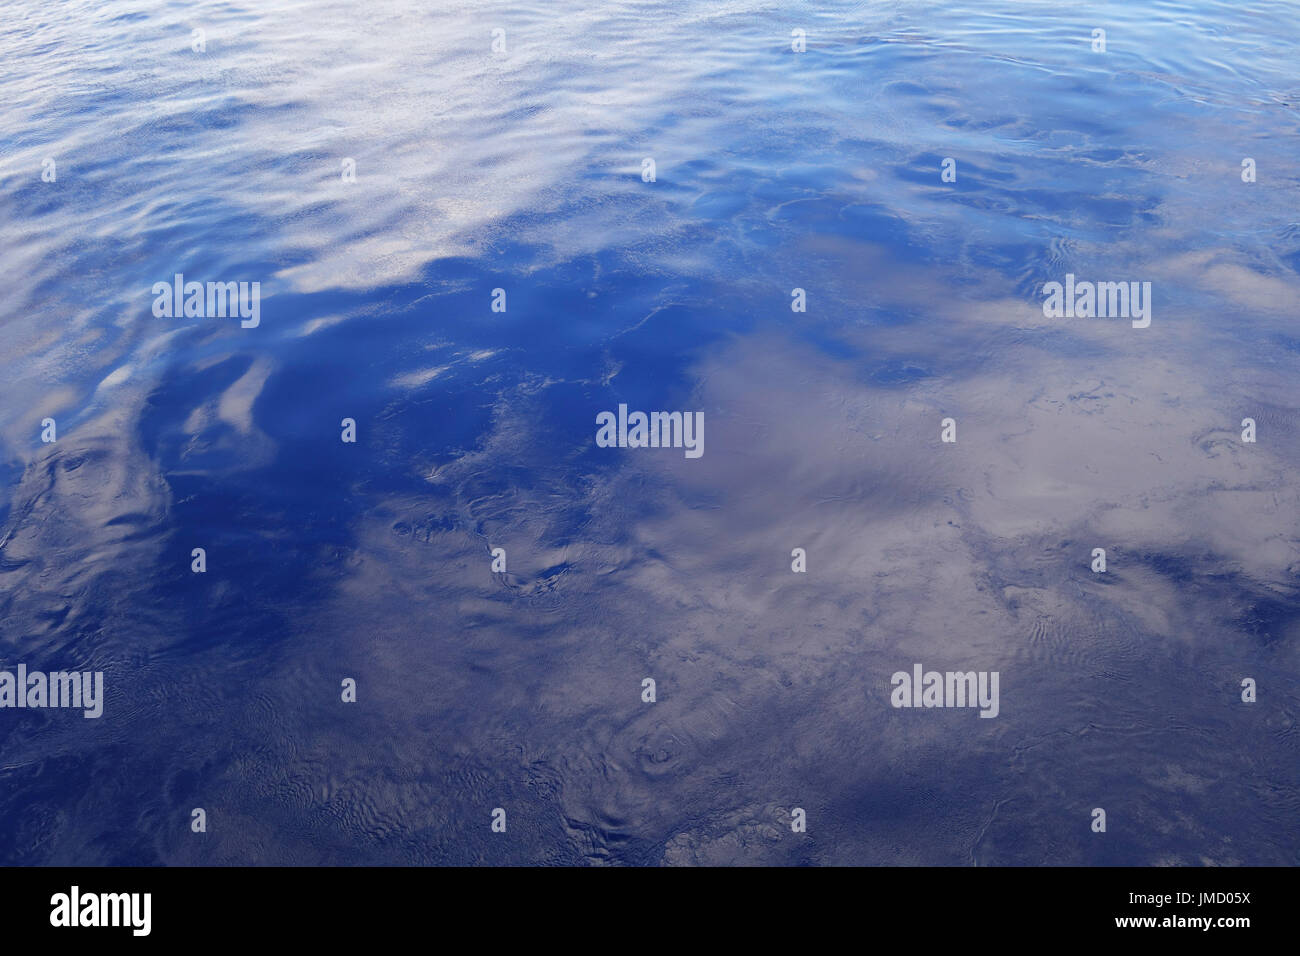 Smooth ocean surface reflecting clouds and sky with ripples Stock Photo